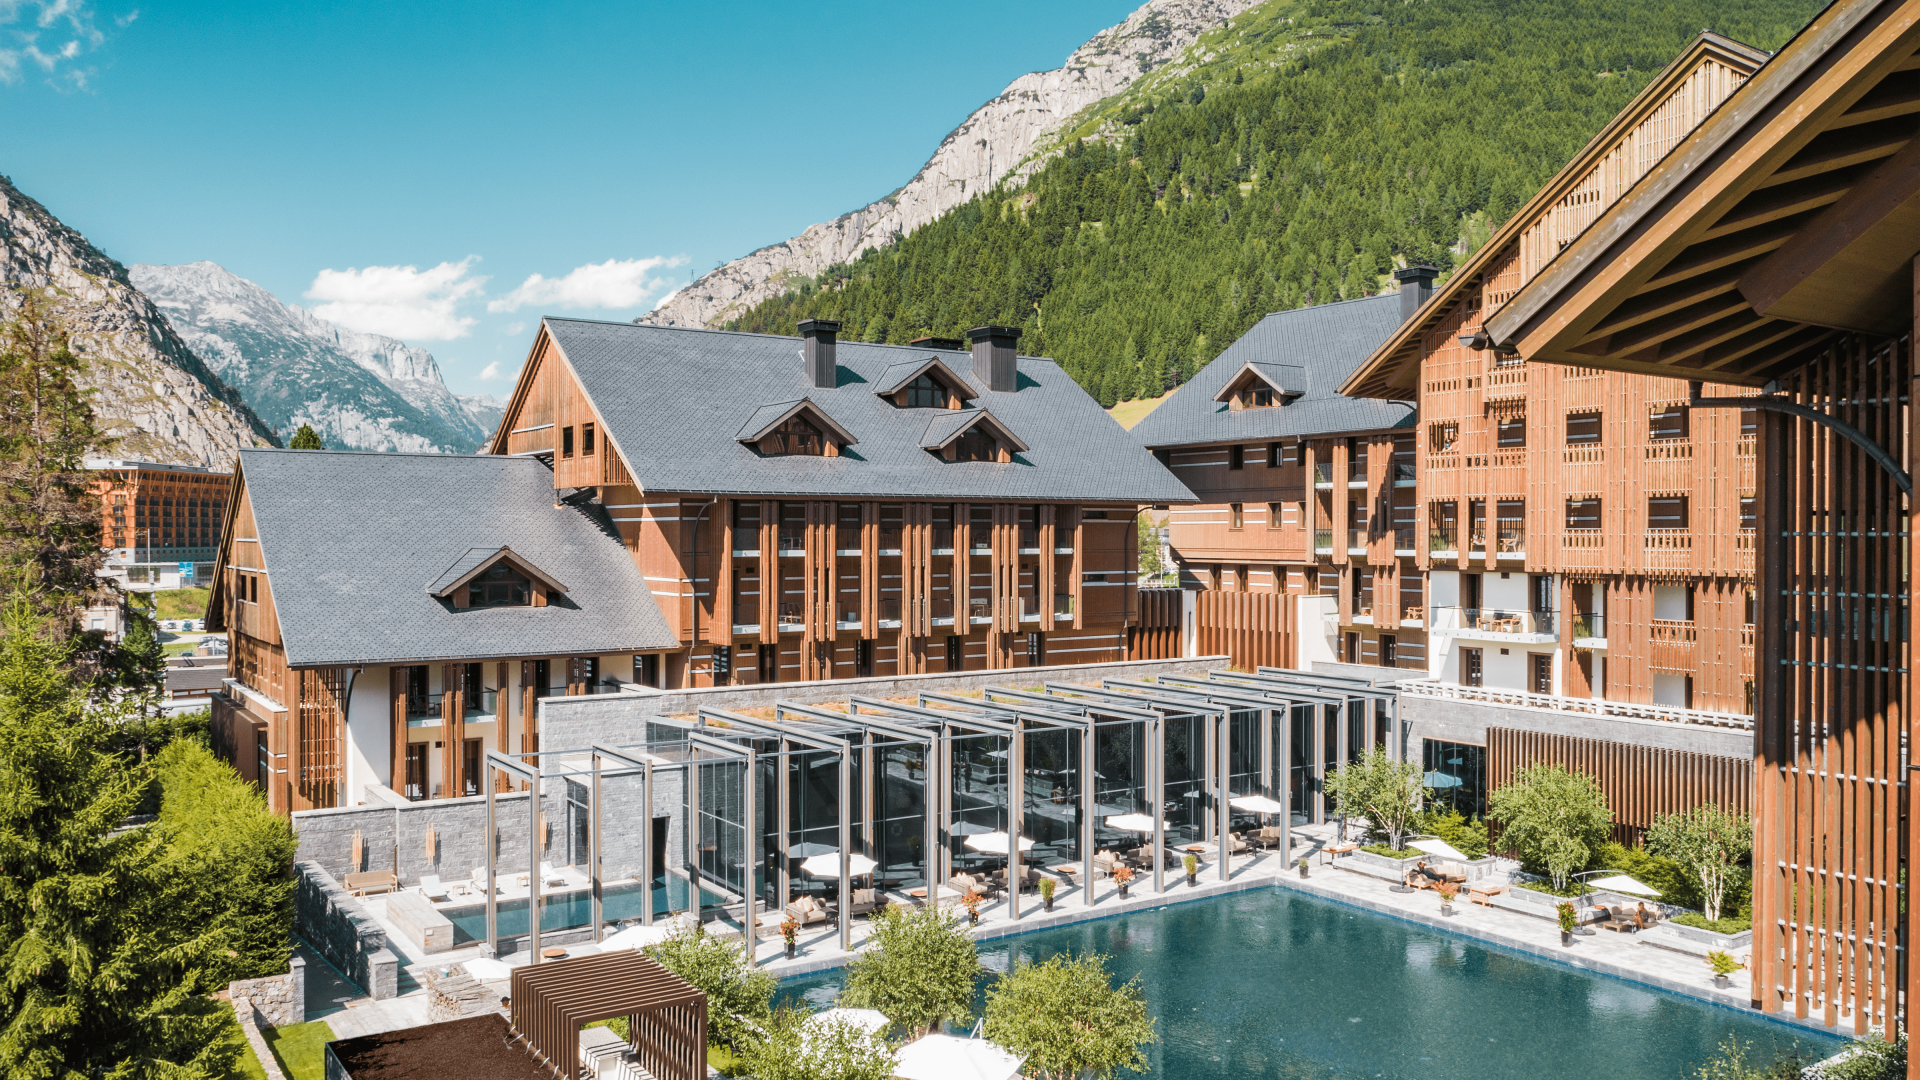 The Chedi Andermatt Top 15 Most Luxurious Spa Resorts on the Earth - 5